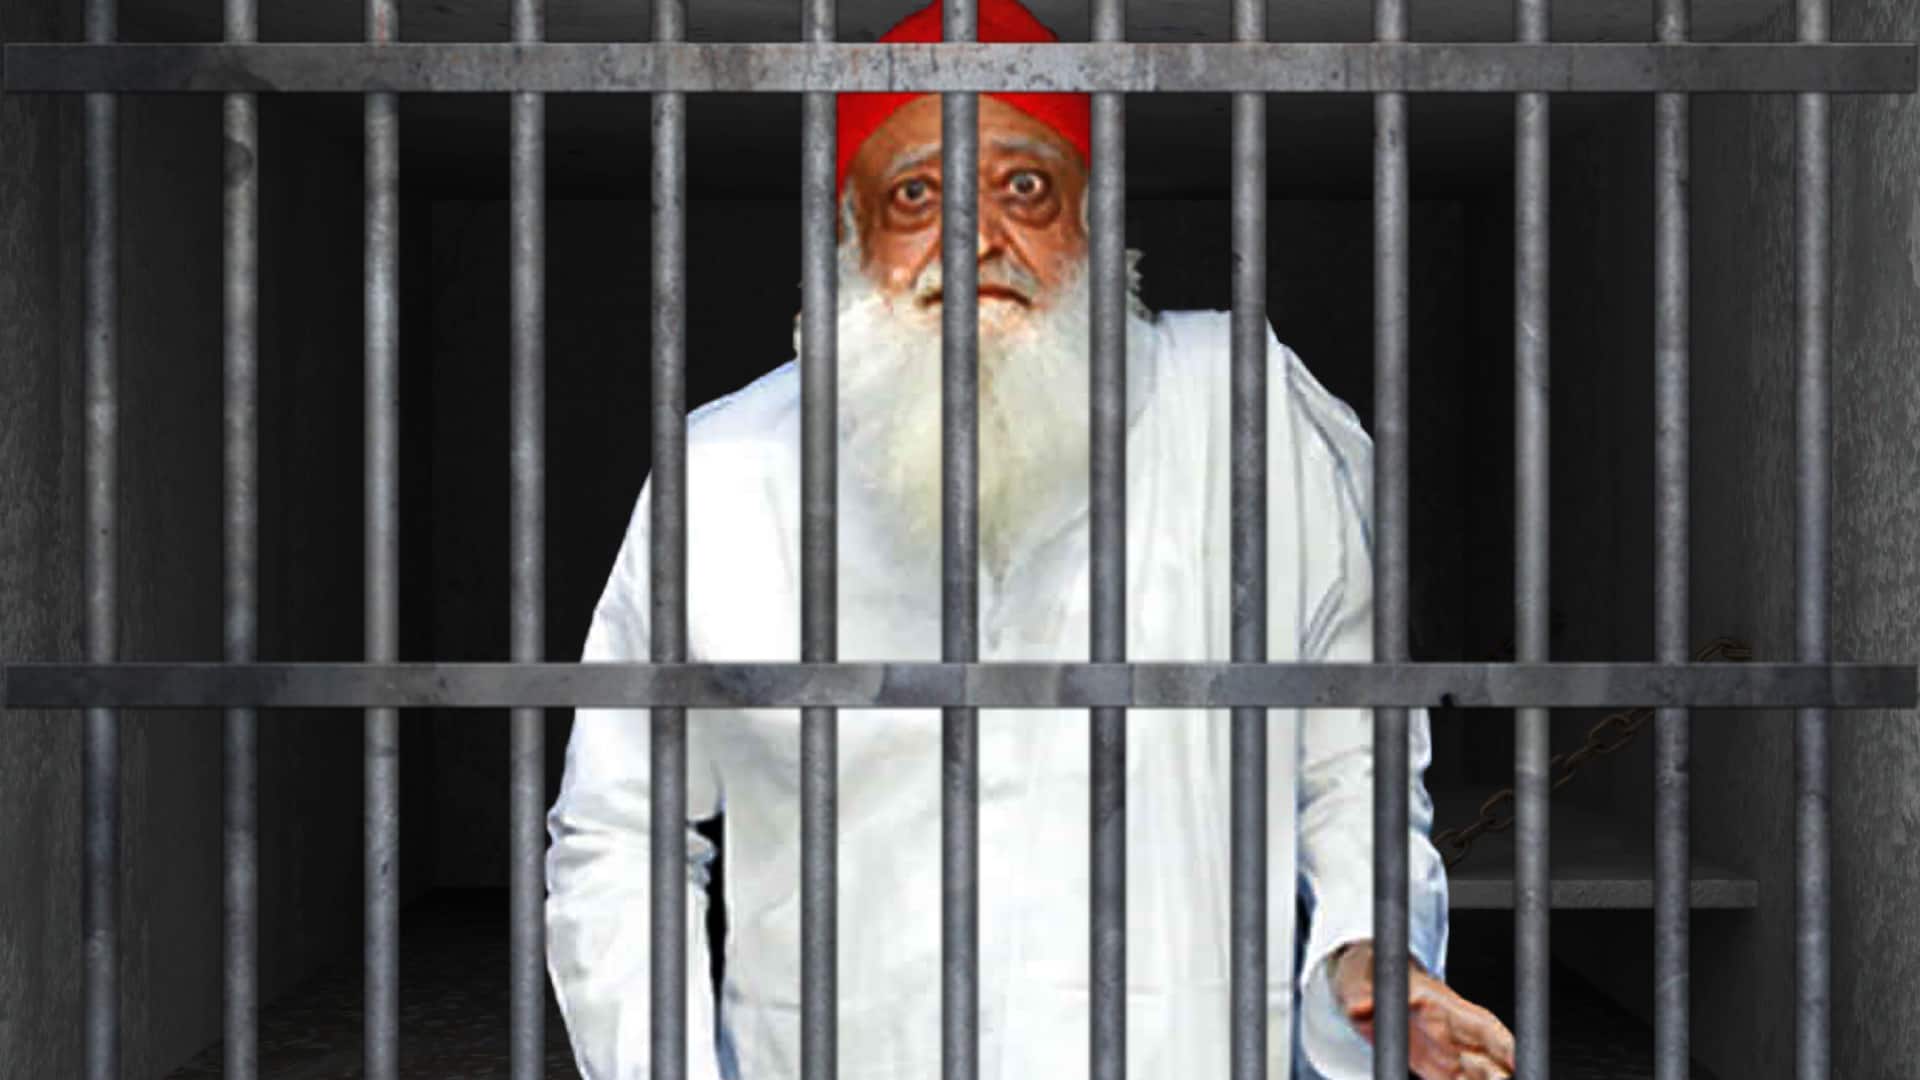 story of fake ascetic Asaram, who kept the whole world in deception for many years